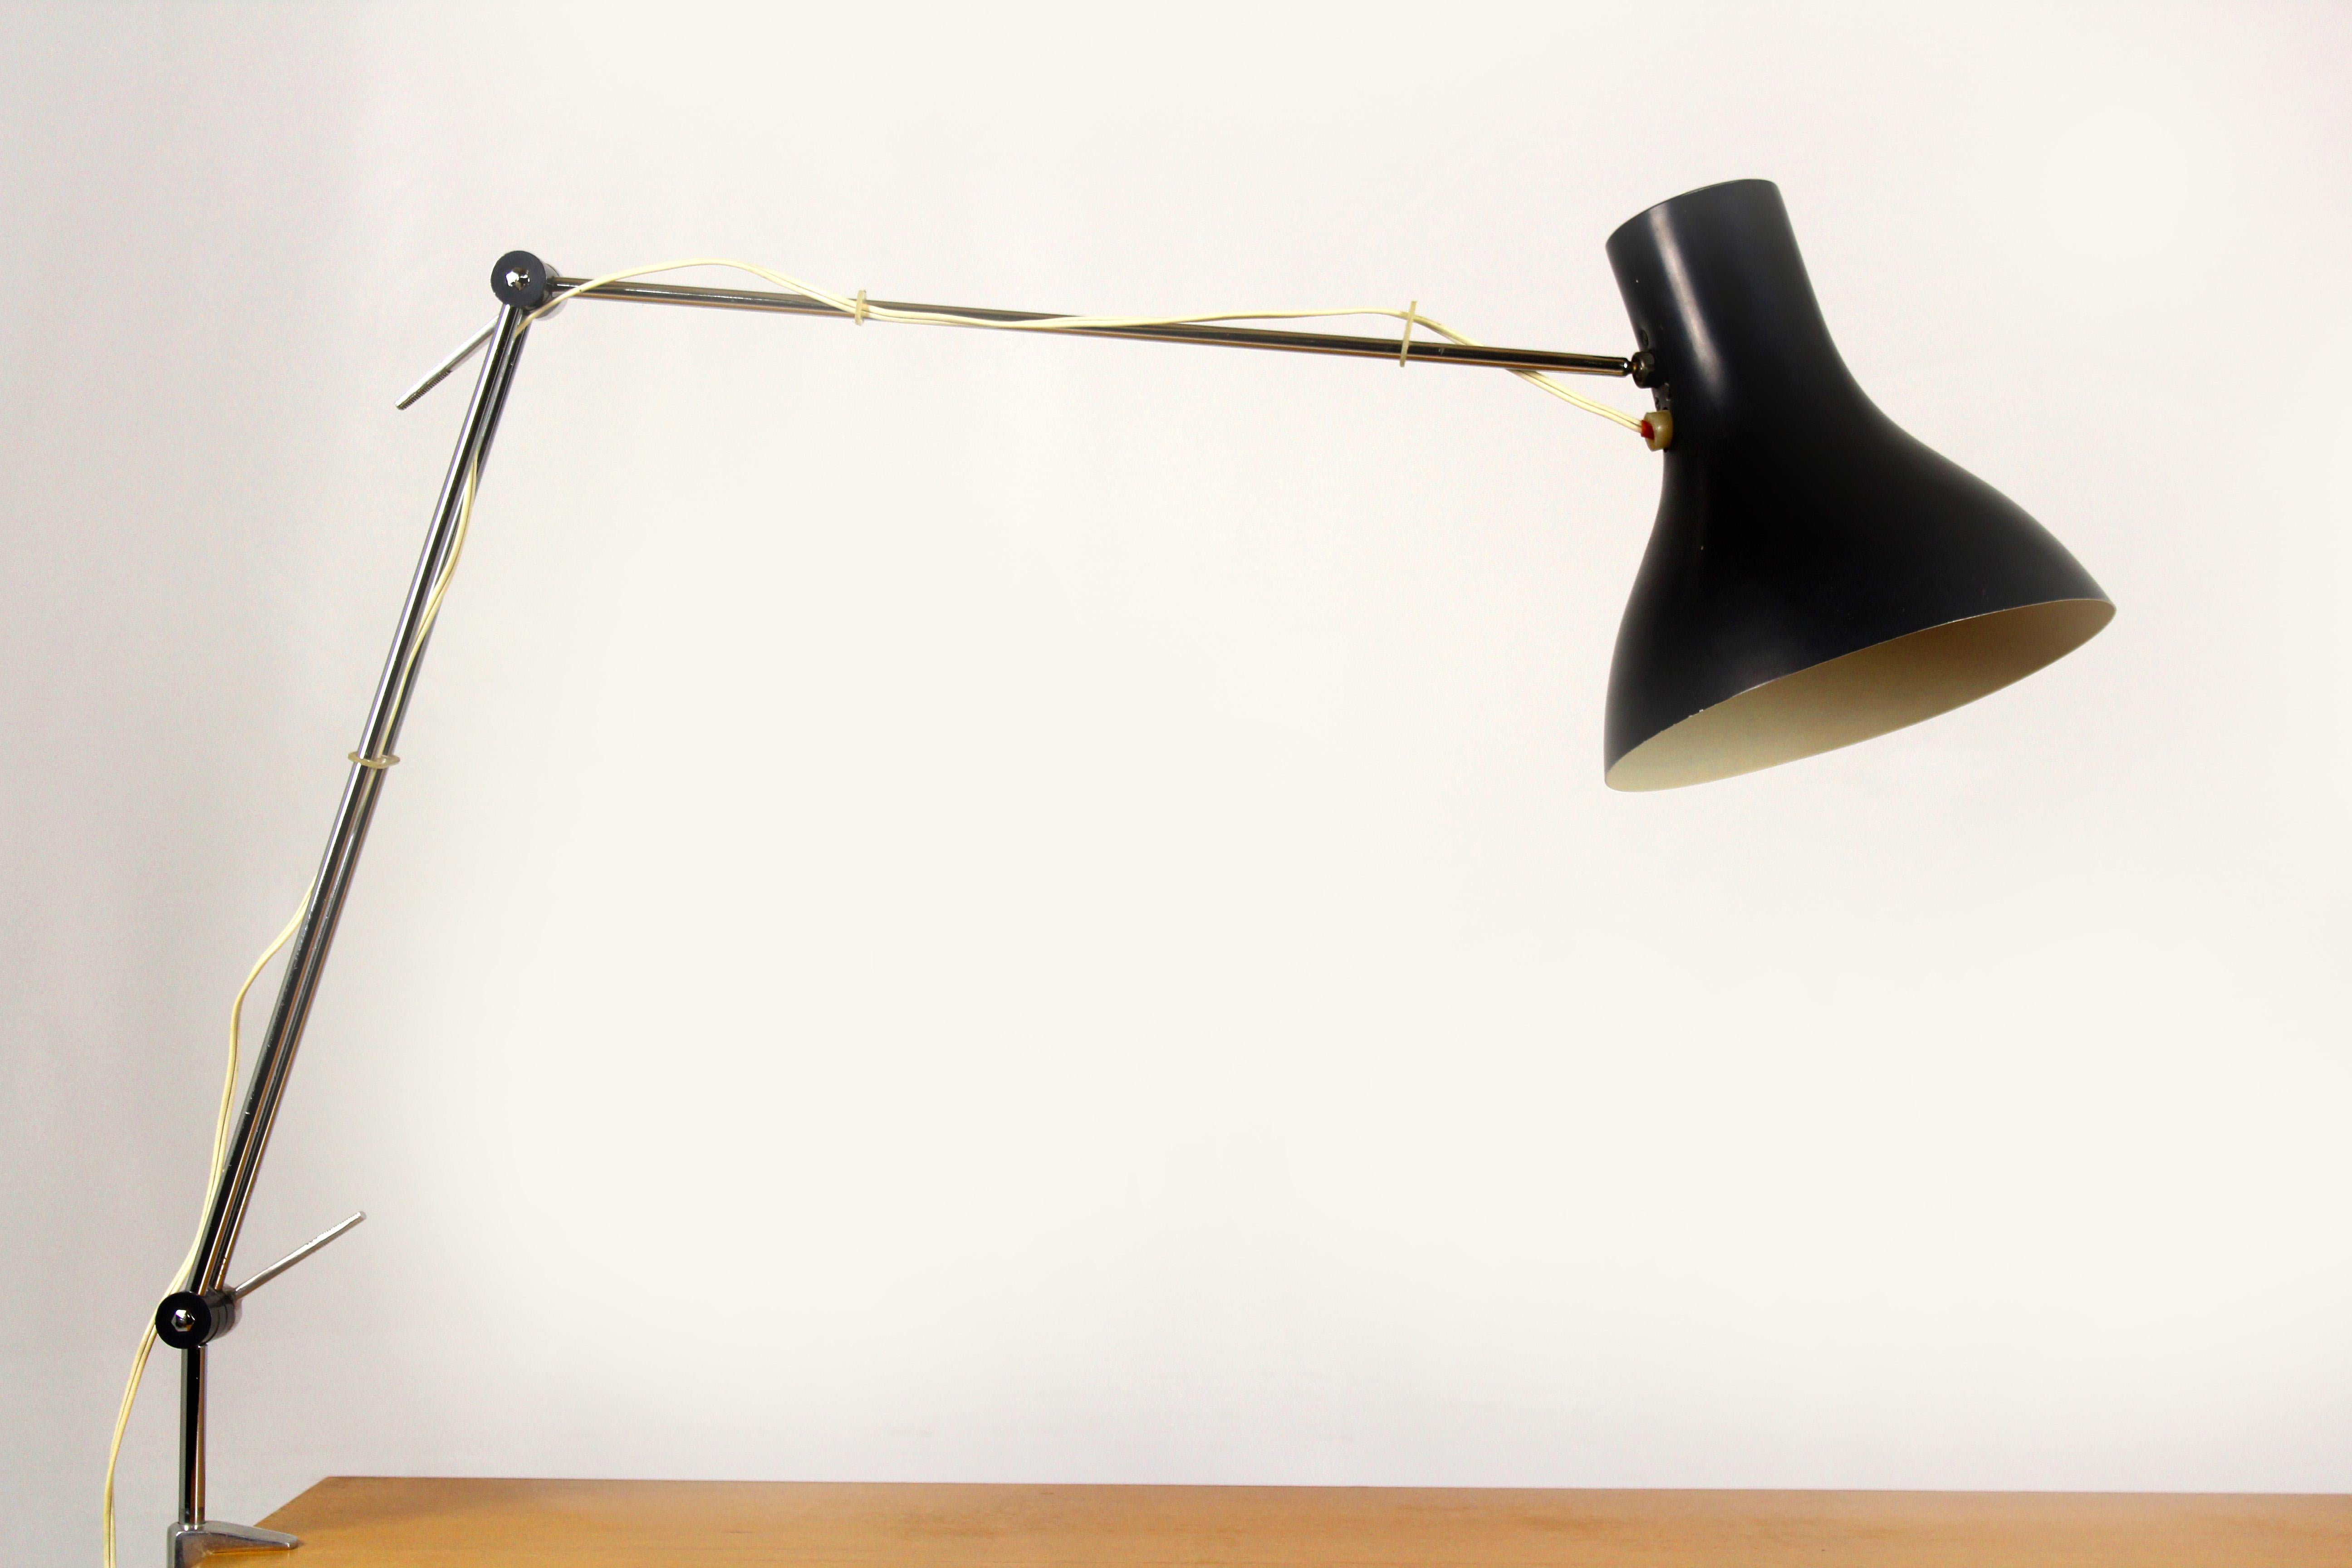 Vintage workshop table lamp from Napako. Designed by Josef Hurka and produced in the 1960s. Lamp is fully functional, features adjustable lampshade and arm. Using light bulb with an E27 thread. Maximum height: 100cm.